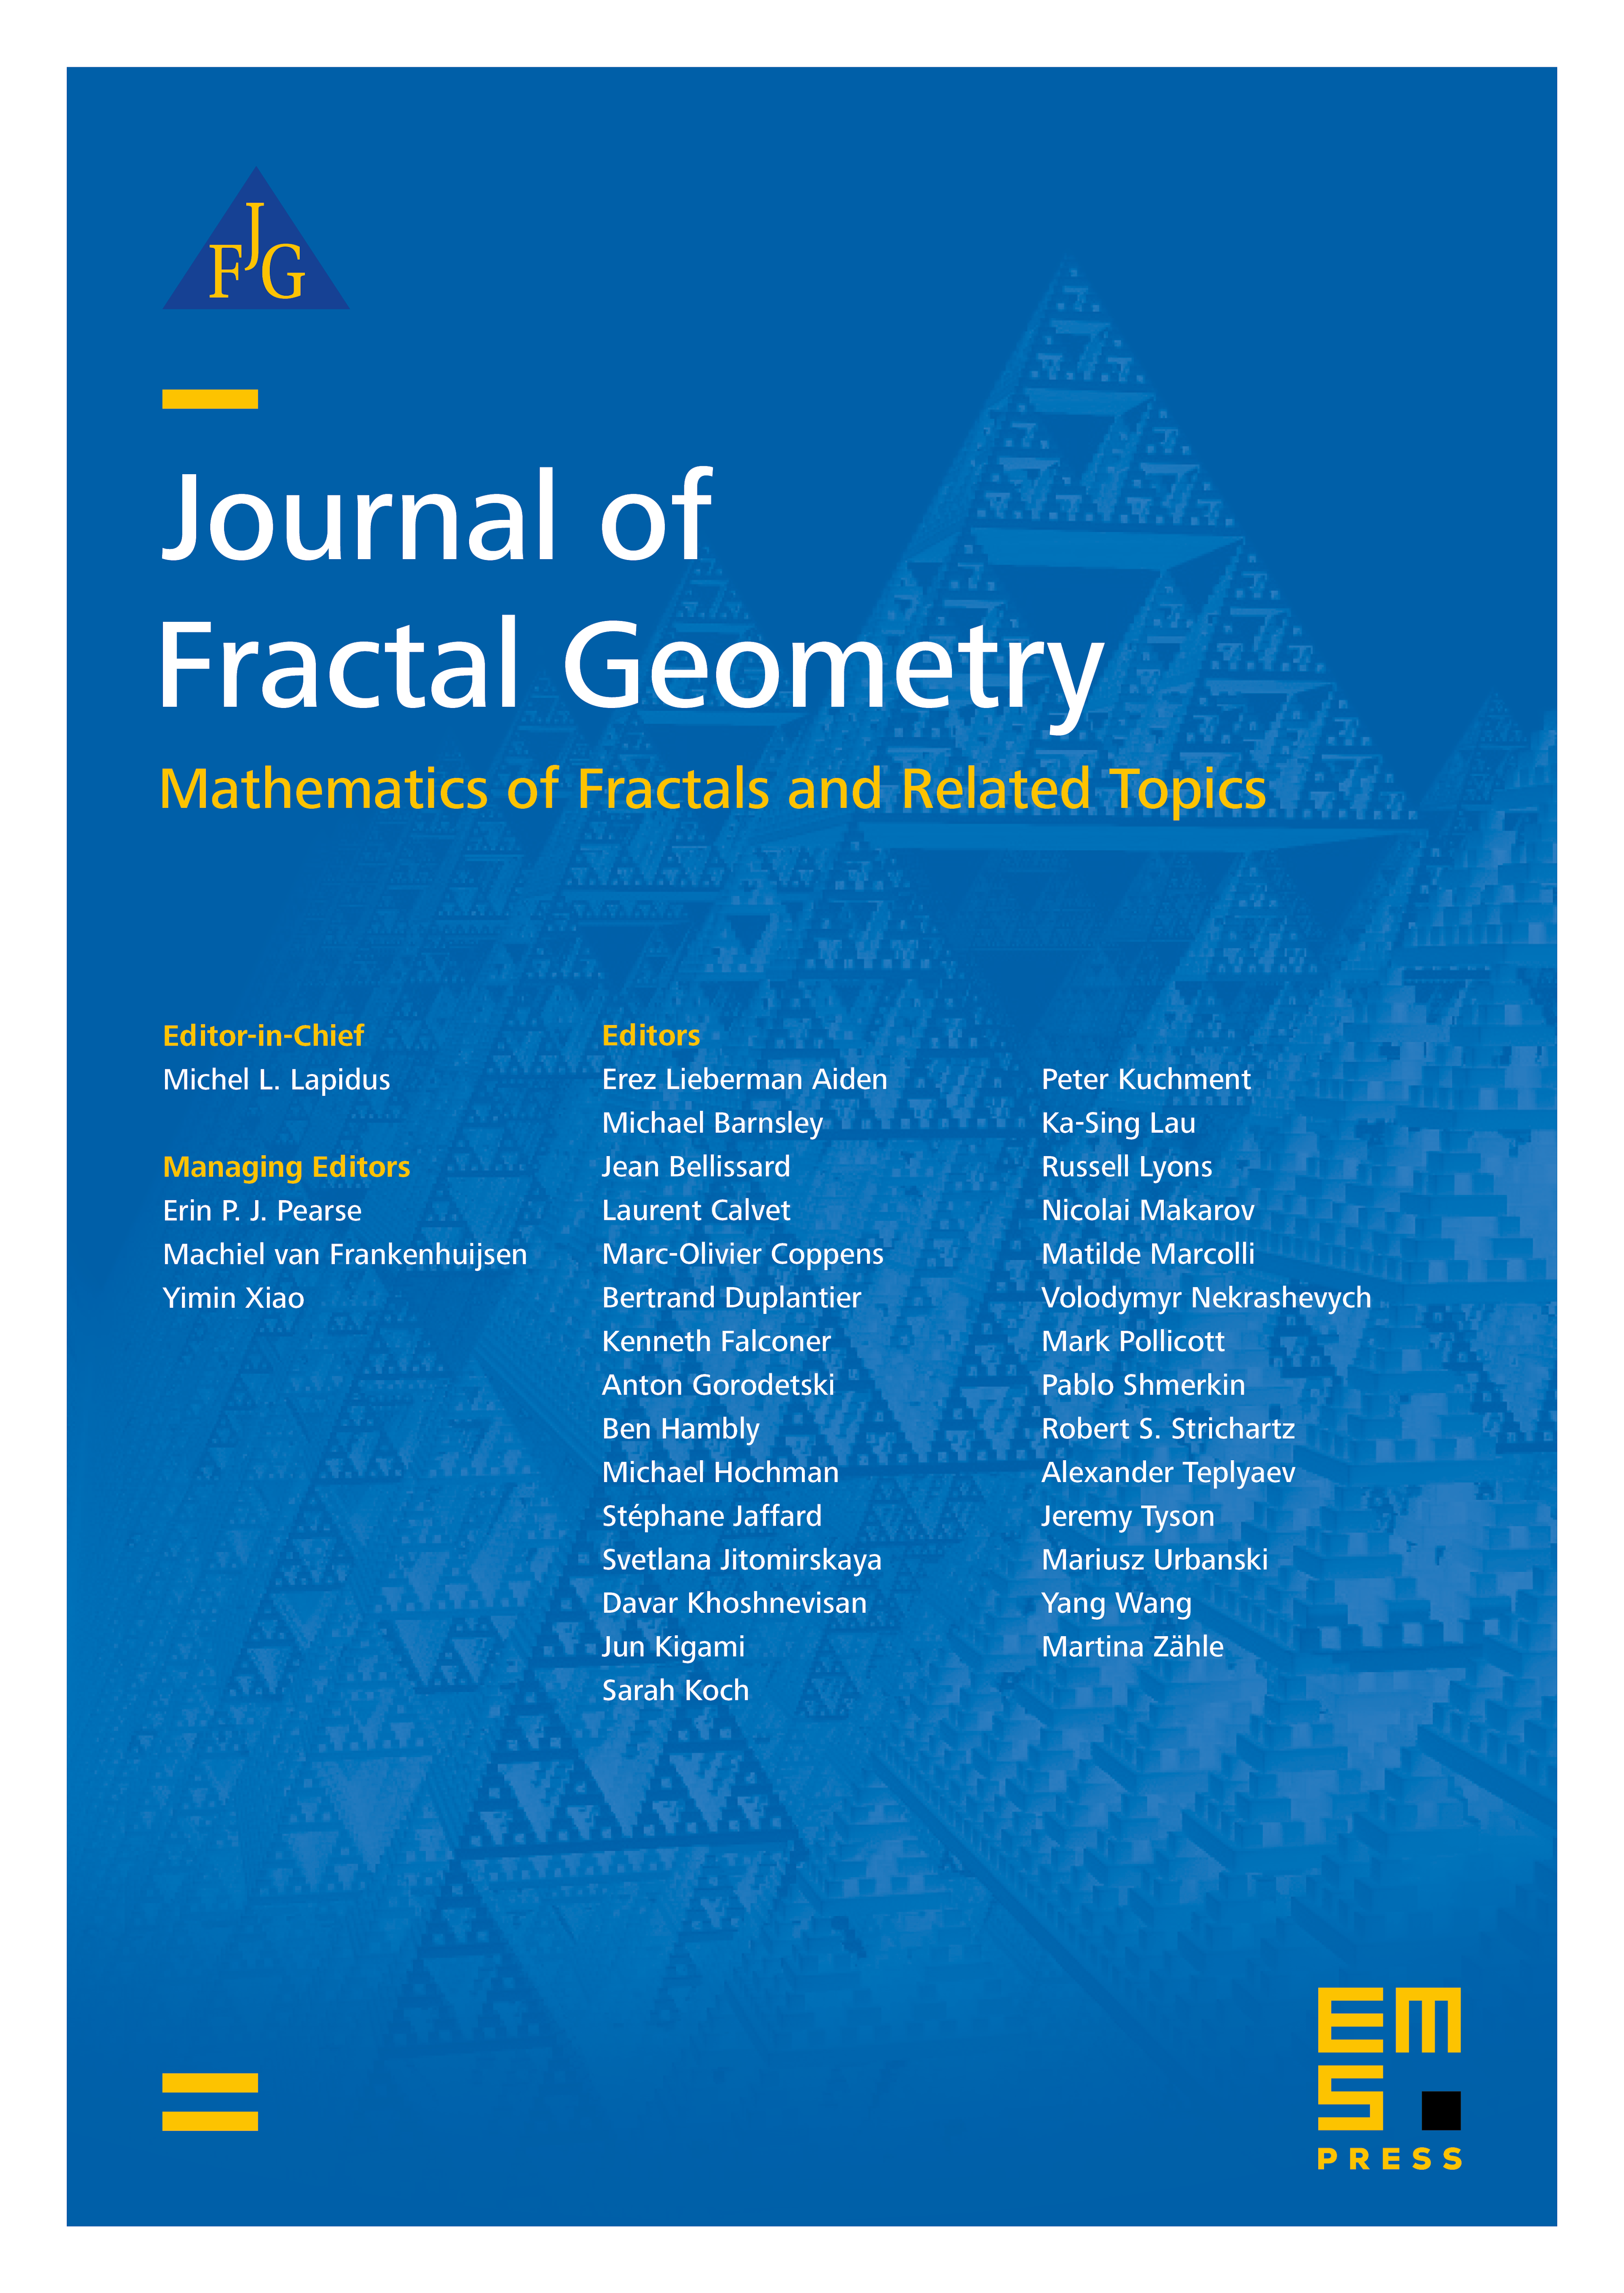 Measures and functions with prescribed homogeneous multifractal spectrum cover